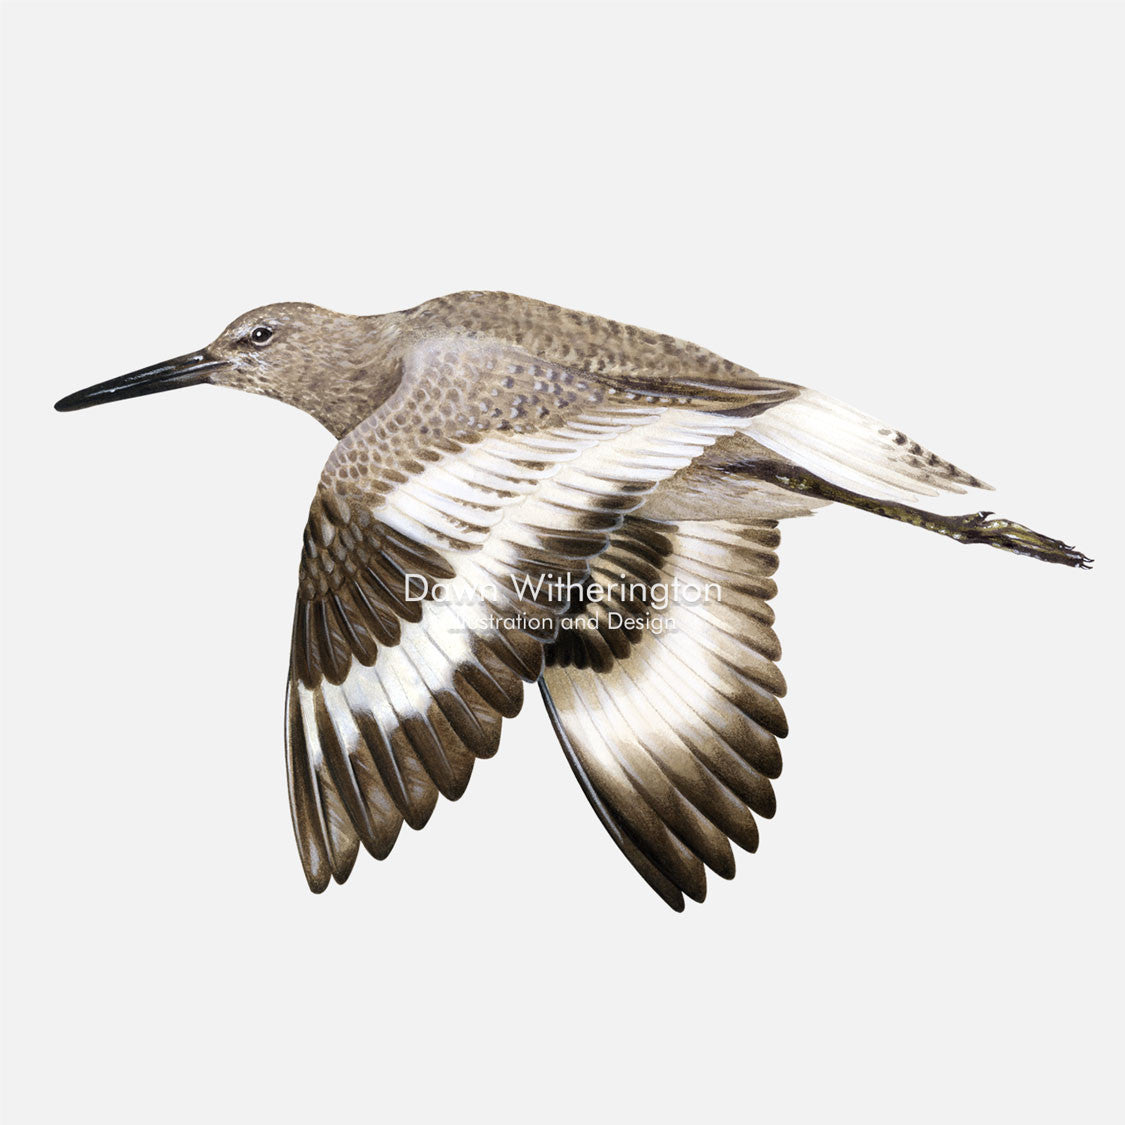 This beautiful illustration of a willet, Tringa semipalmata, in flight, is biologically accurate in detail.